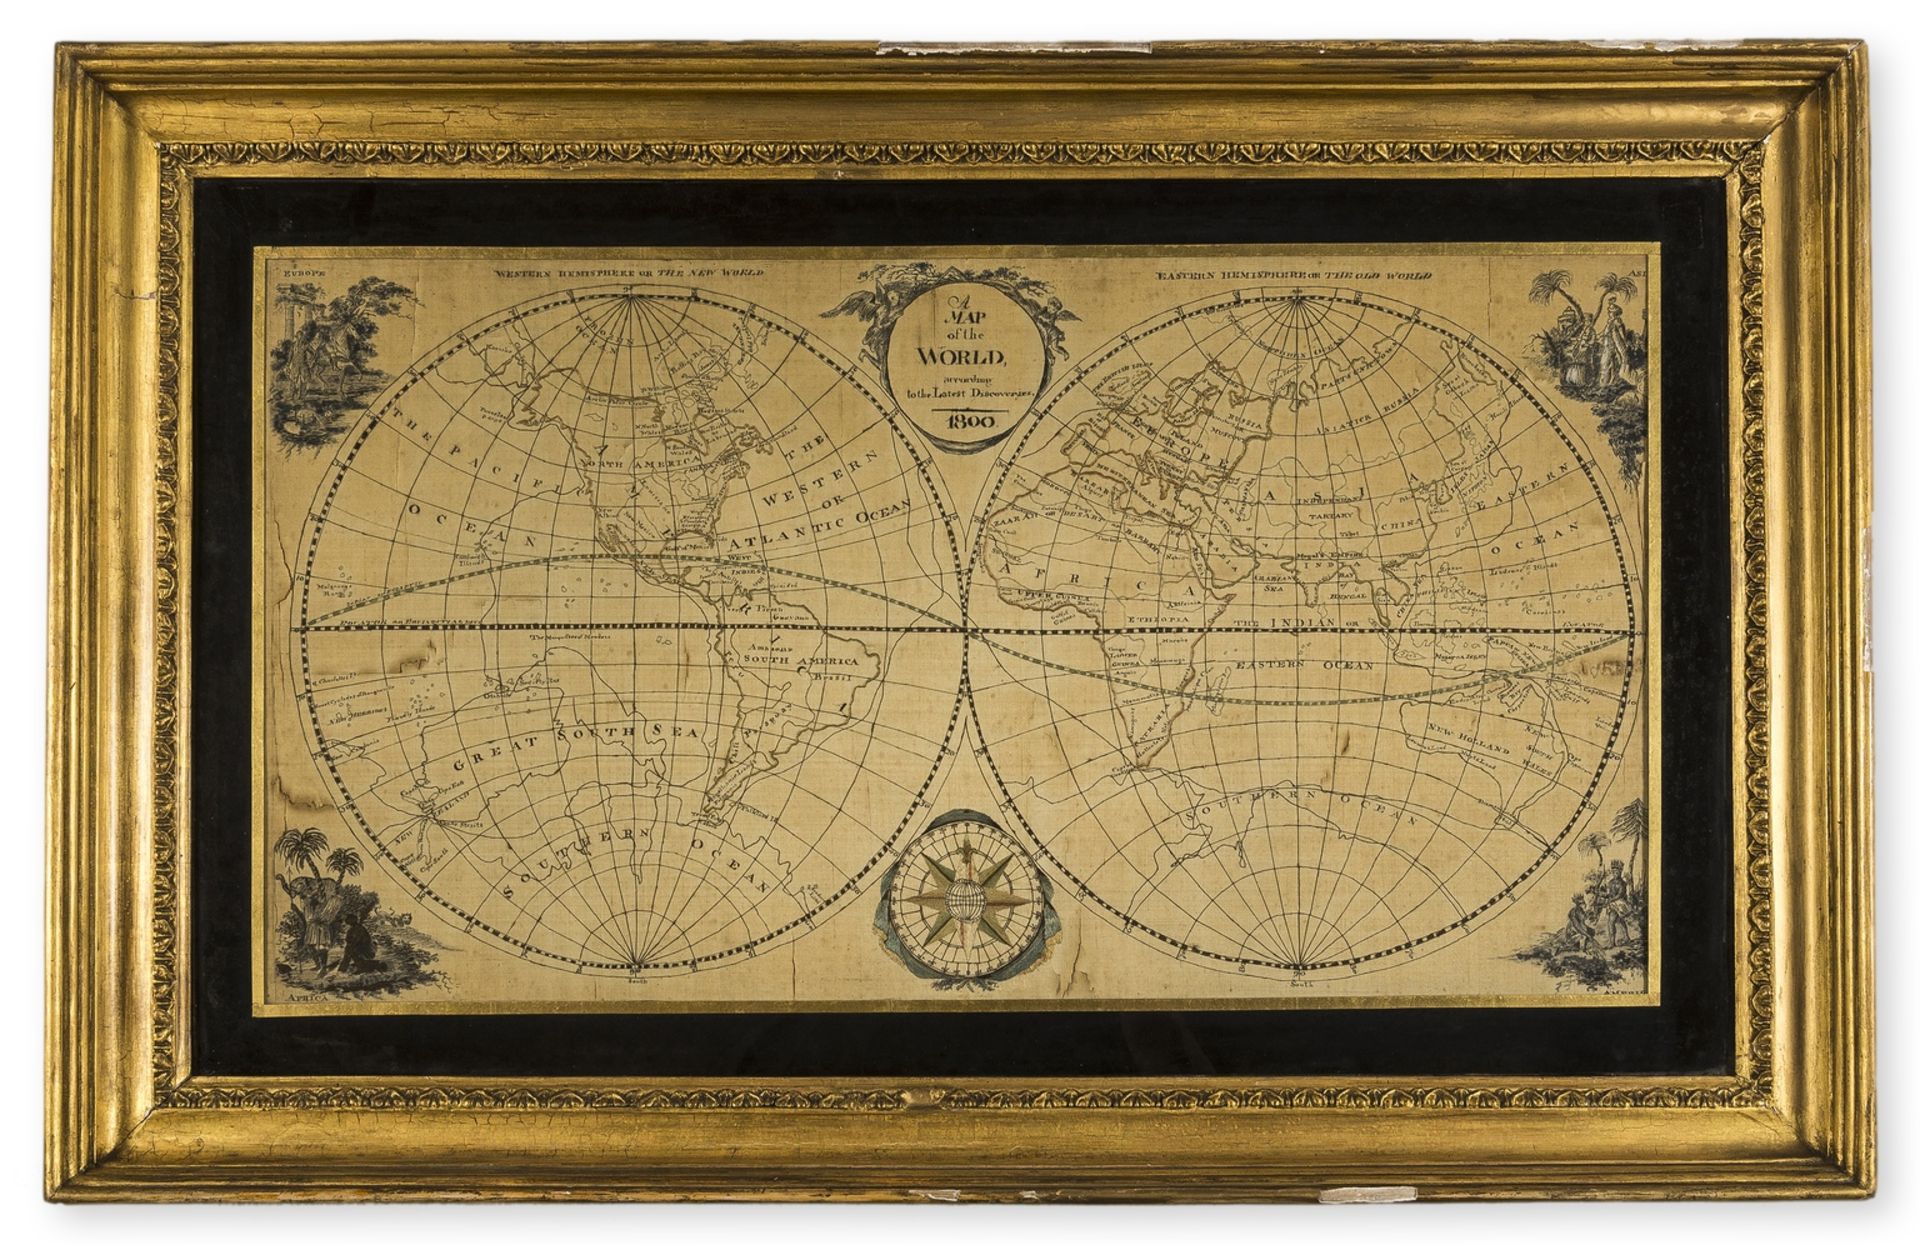 World.- Needlework.- Anonymous (1800) A Map of the World, According to the Latest Discoveries, 1800.